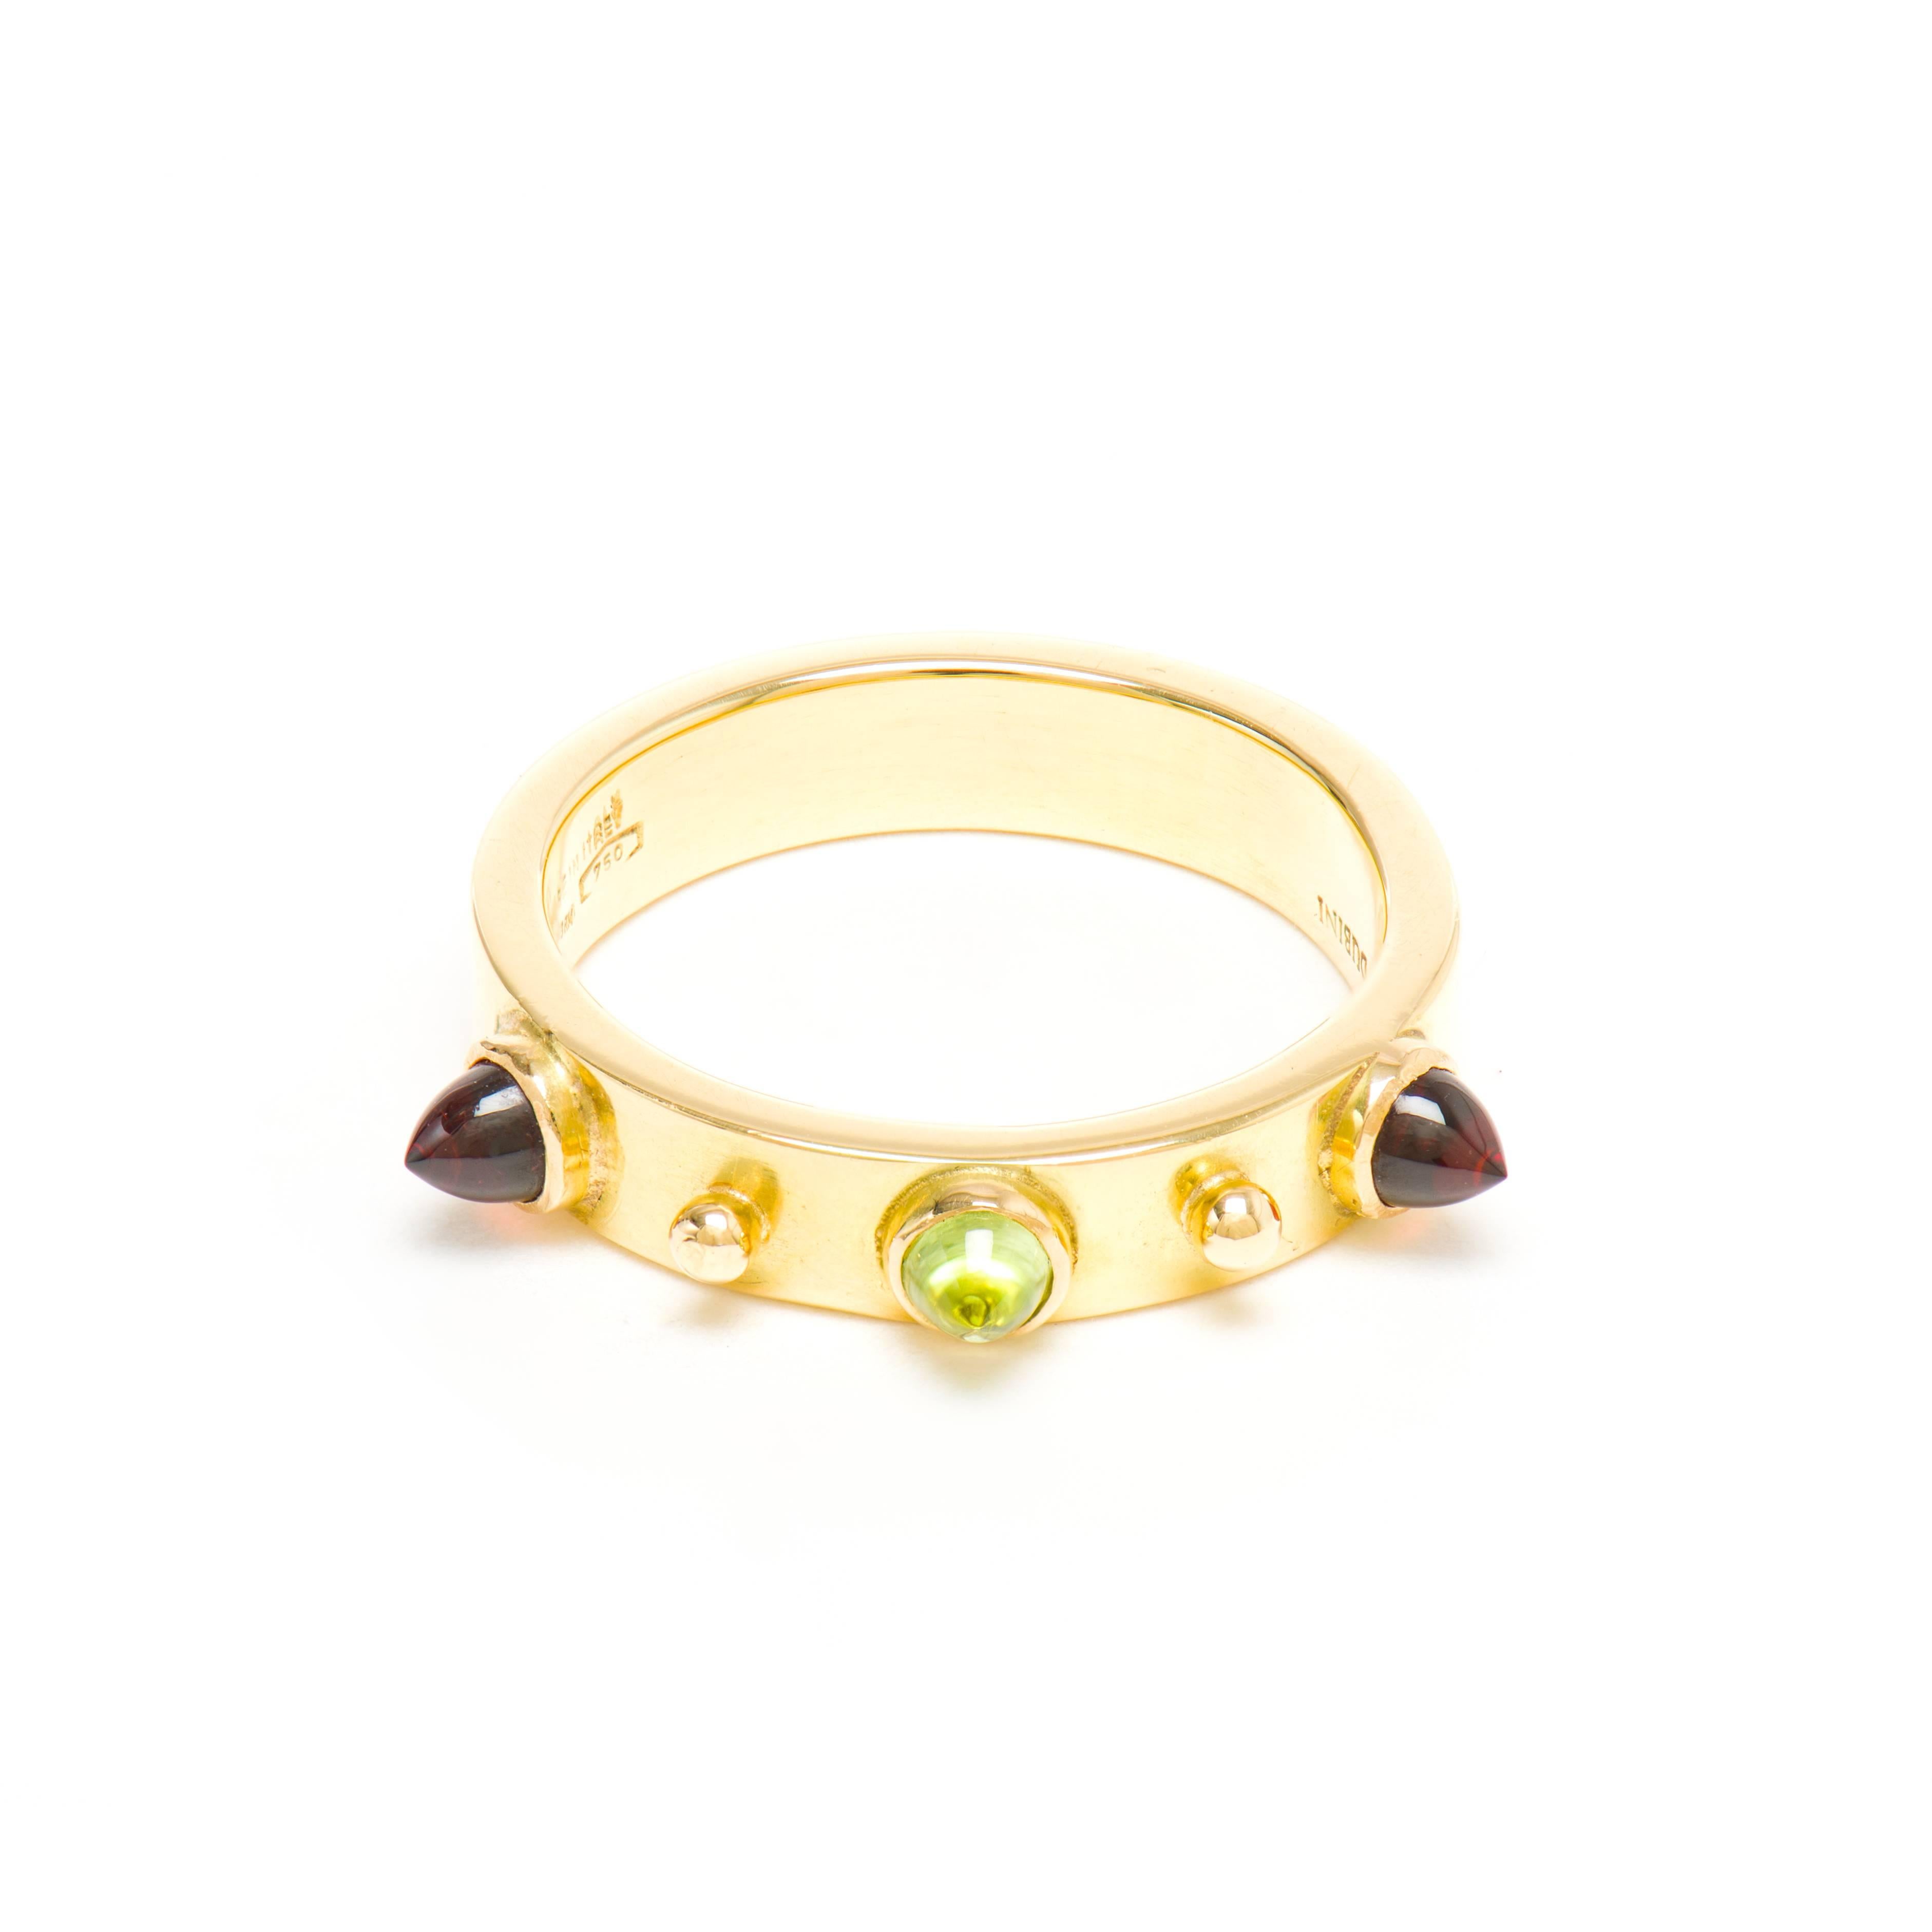 This DUBINI ring from the 'Empires' collection features our signature bullet cabochons set in 18K yellow gold.

Available in size EU 52.

This ring can be ordered in any size with a lead time of 1-2